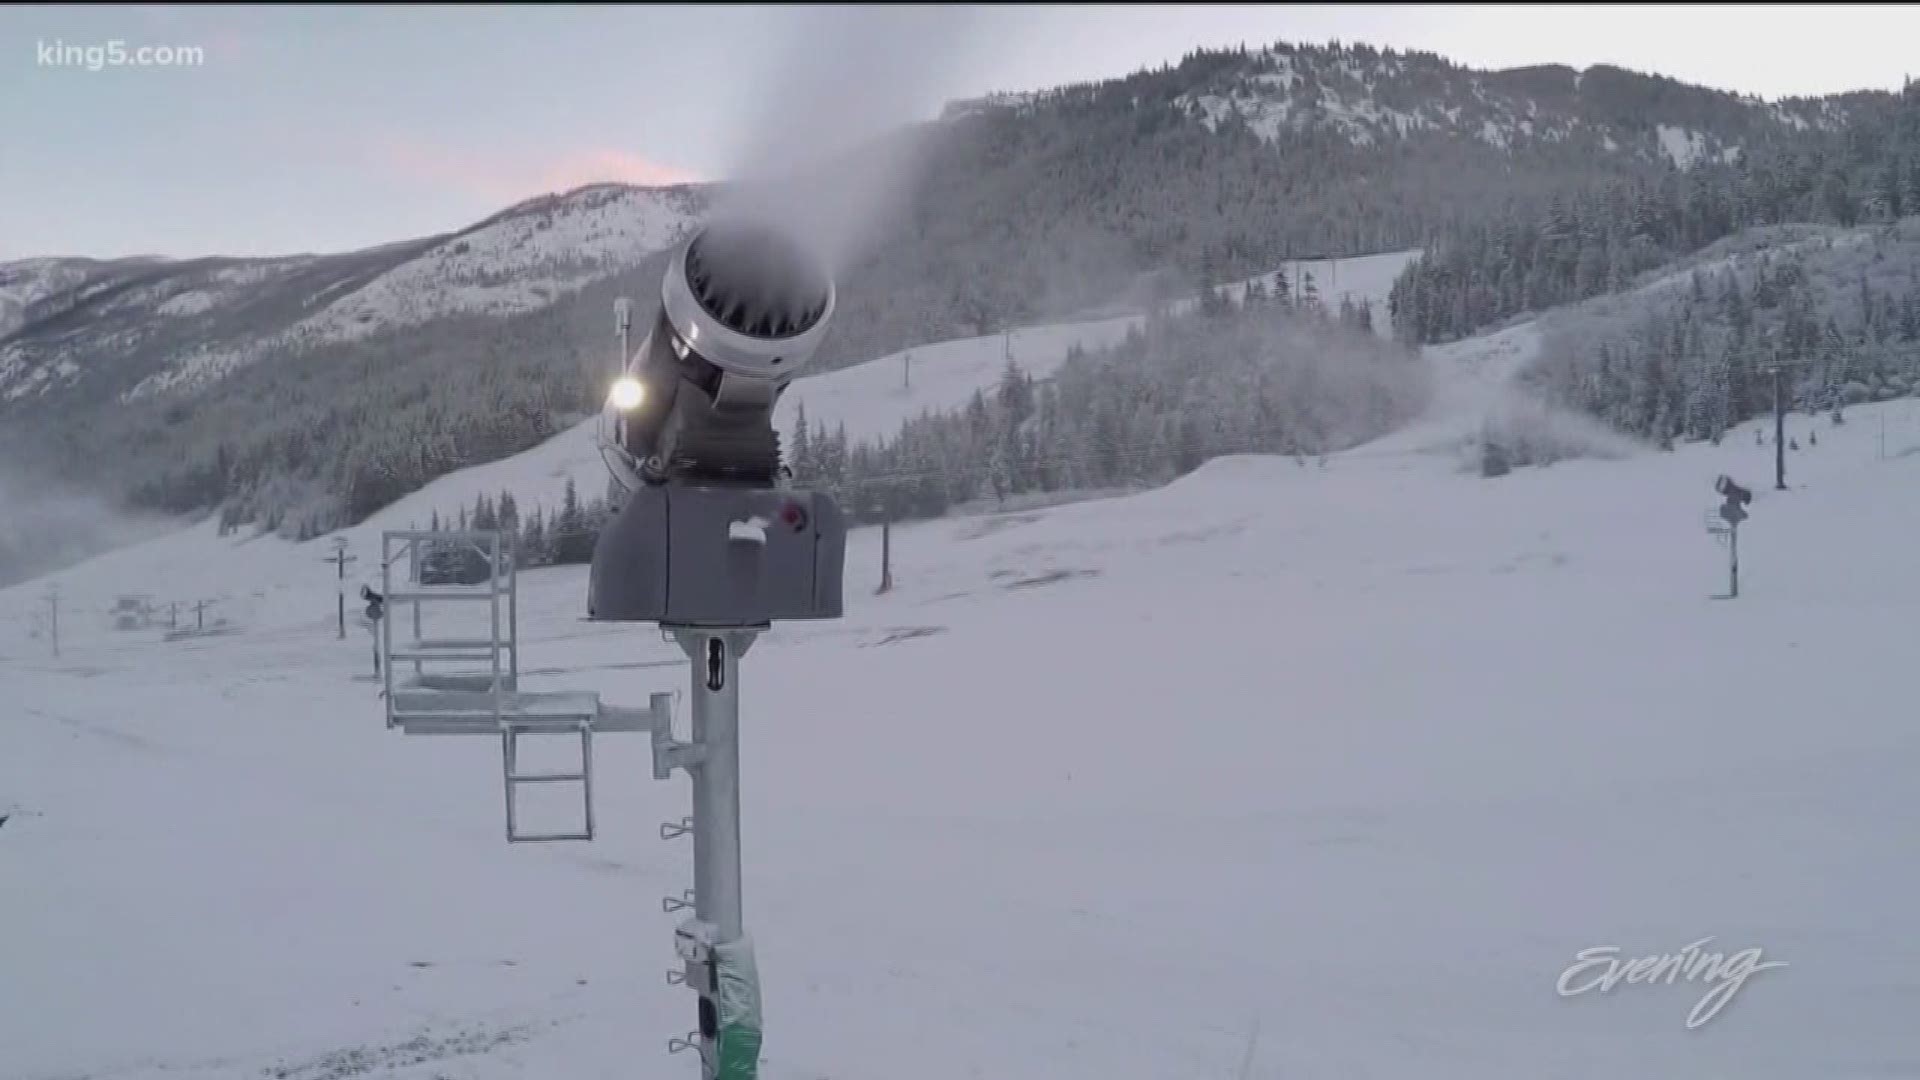 The season is in full swing thanks to Mother Nature and a snow-making arsenal